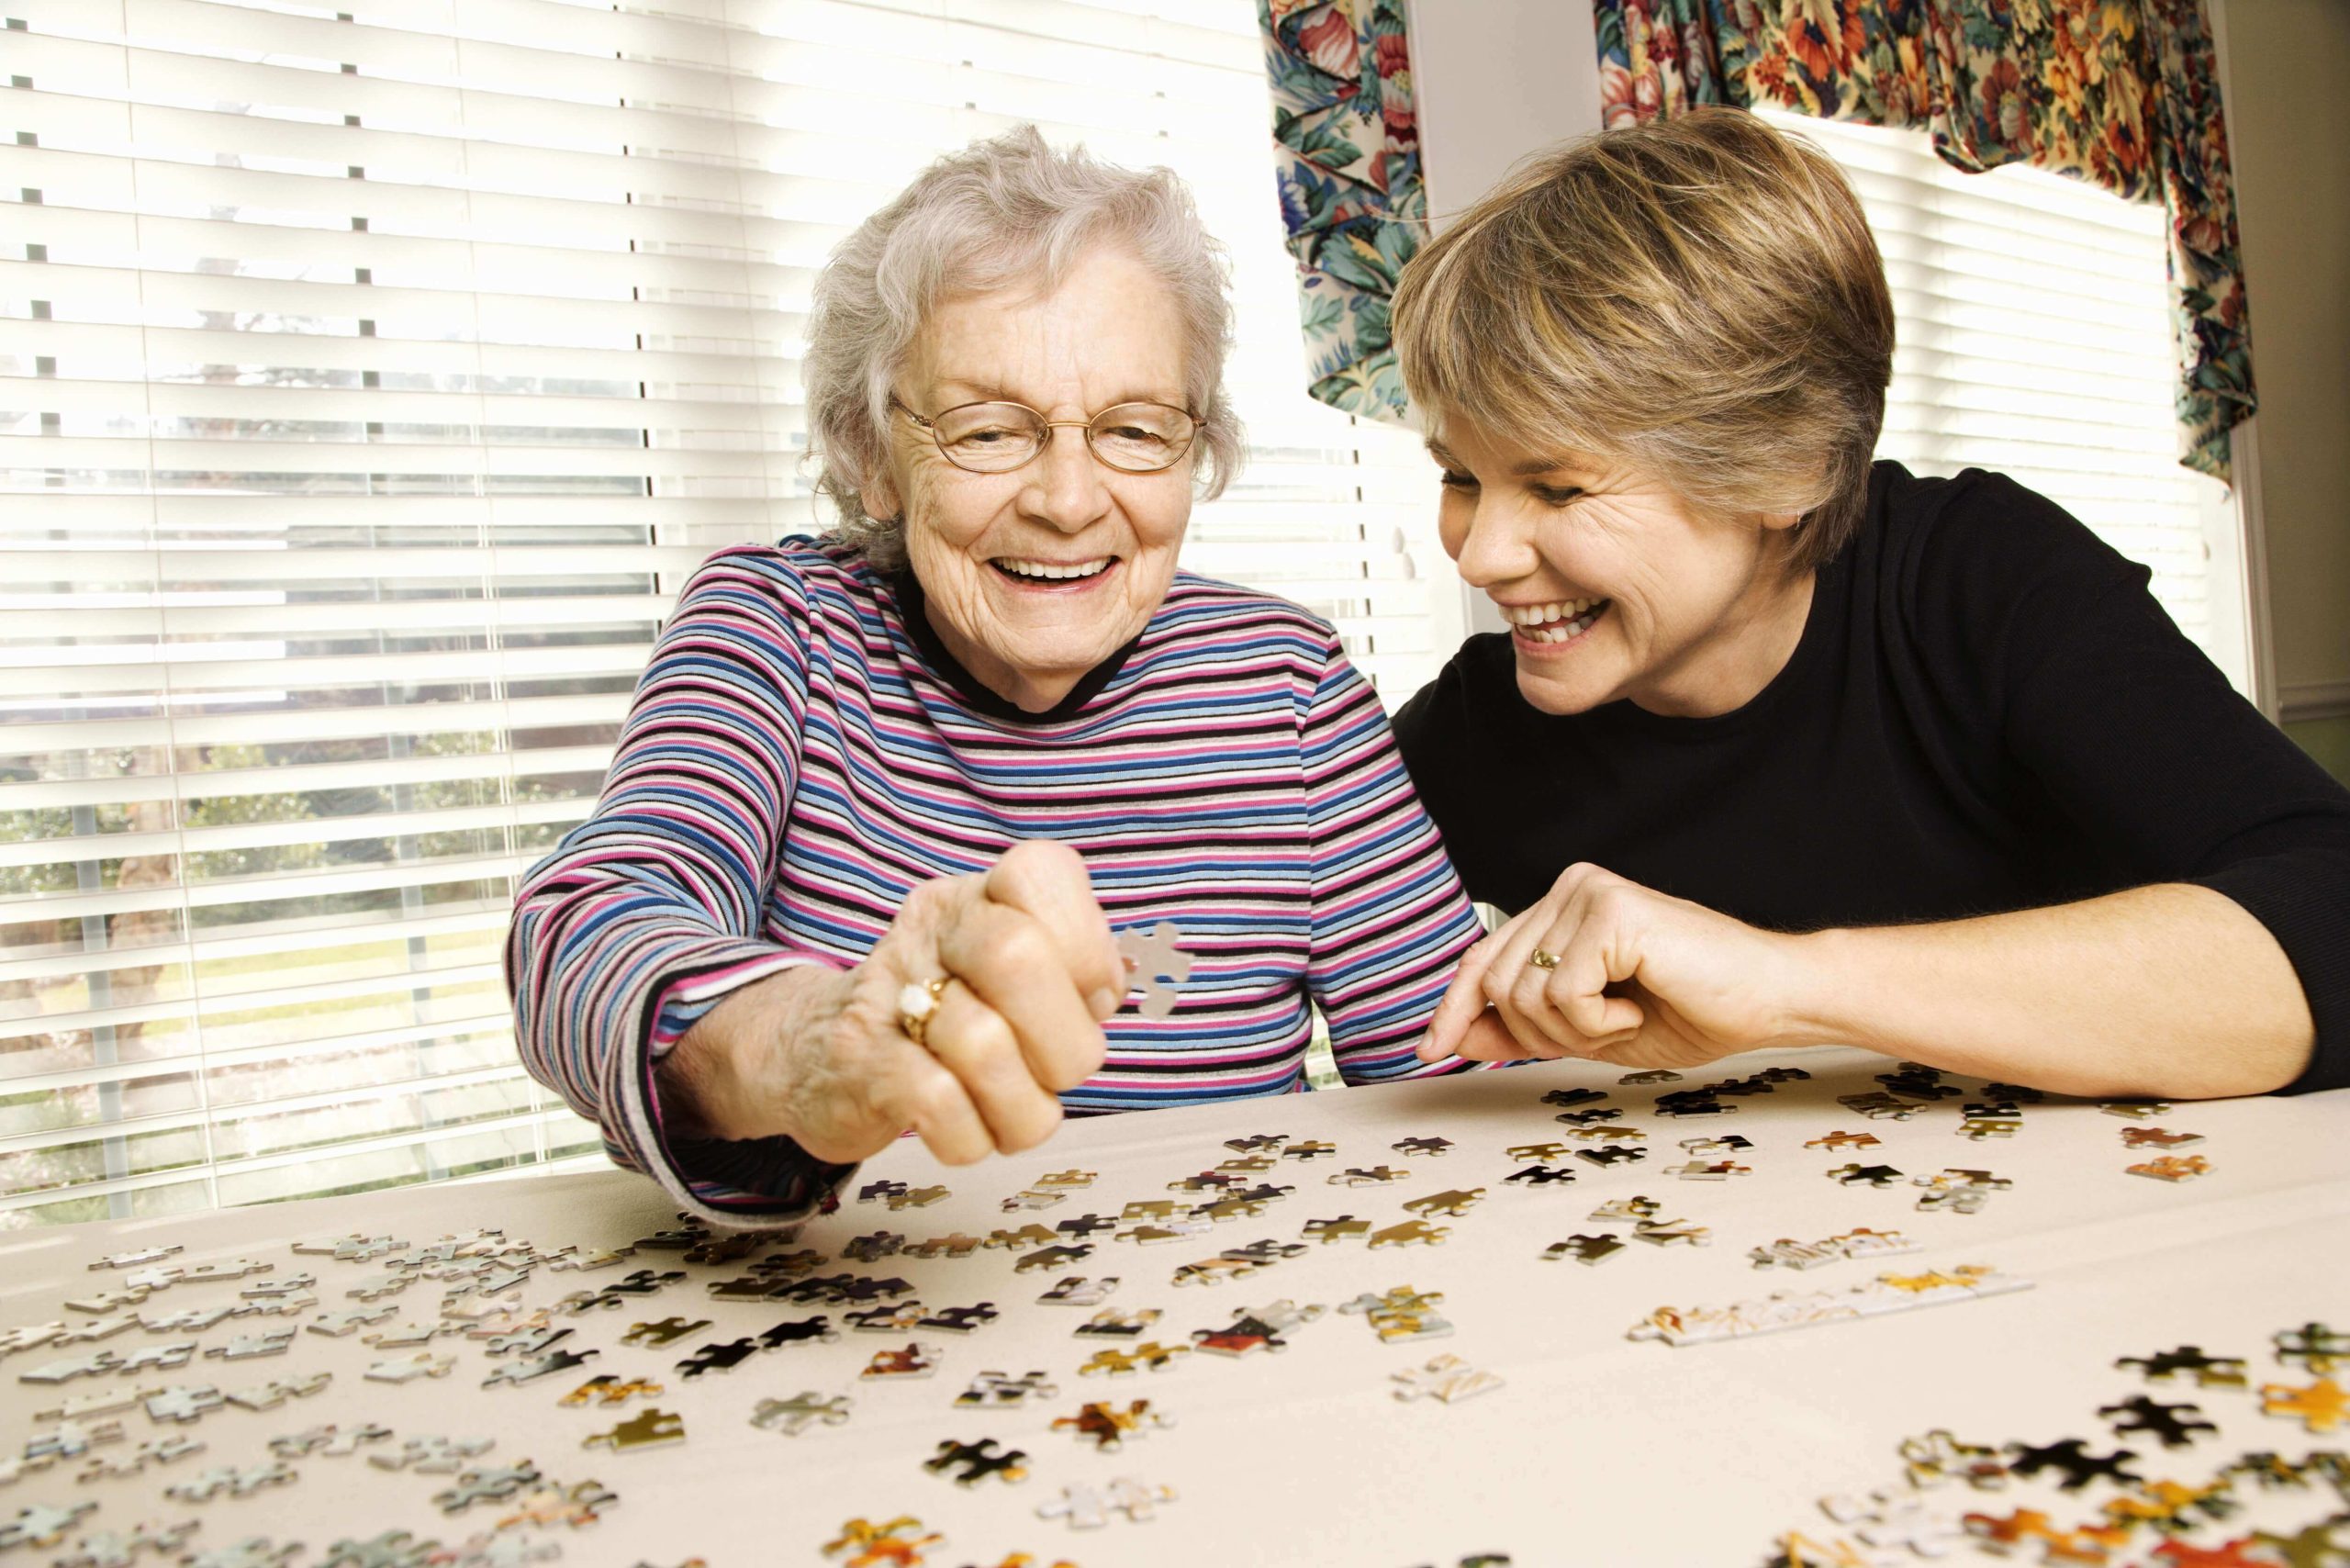 Elderly Woman and Younger Woman Doing Puzzle